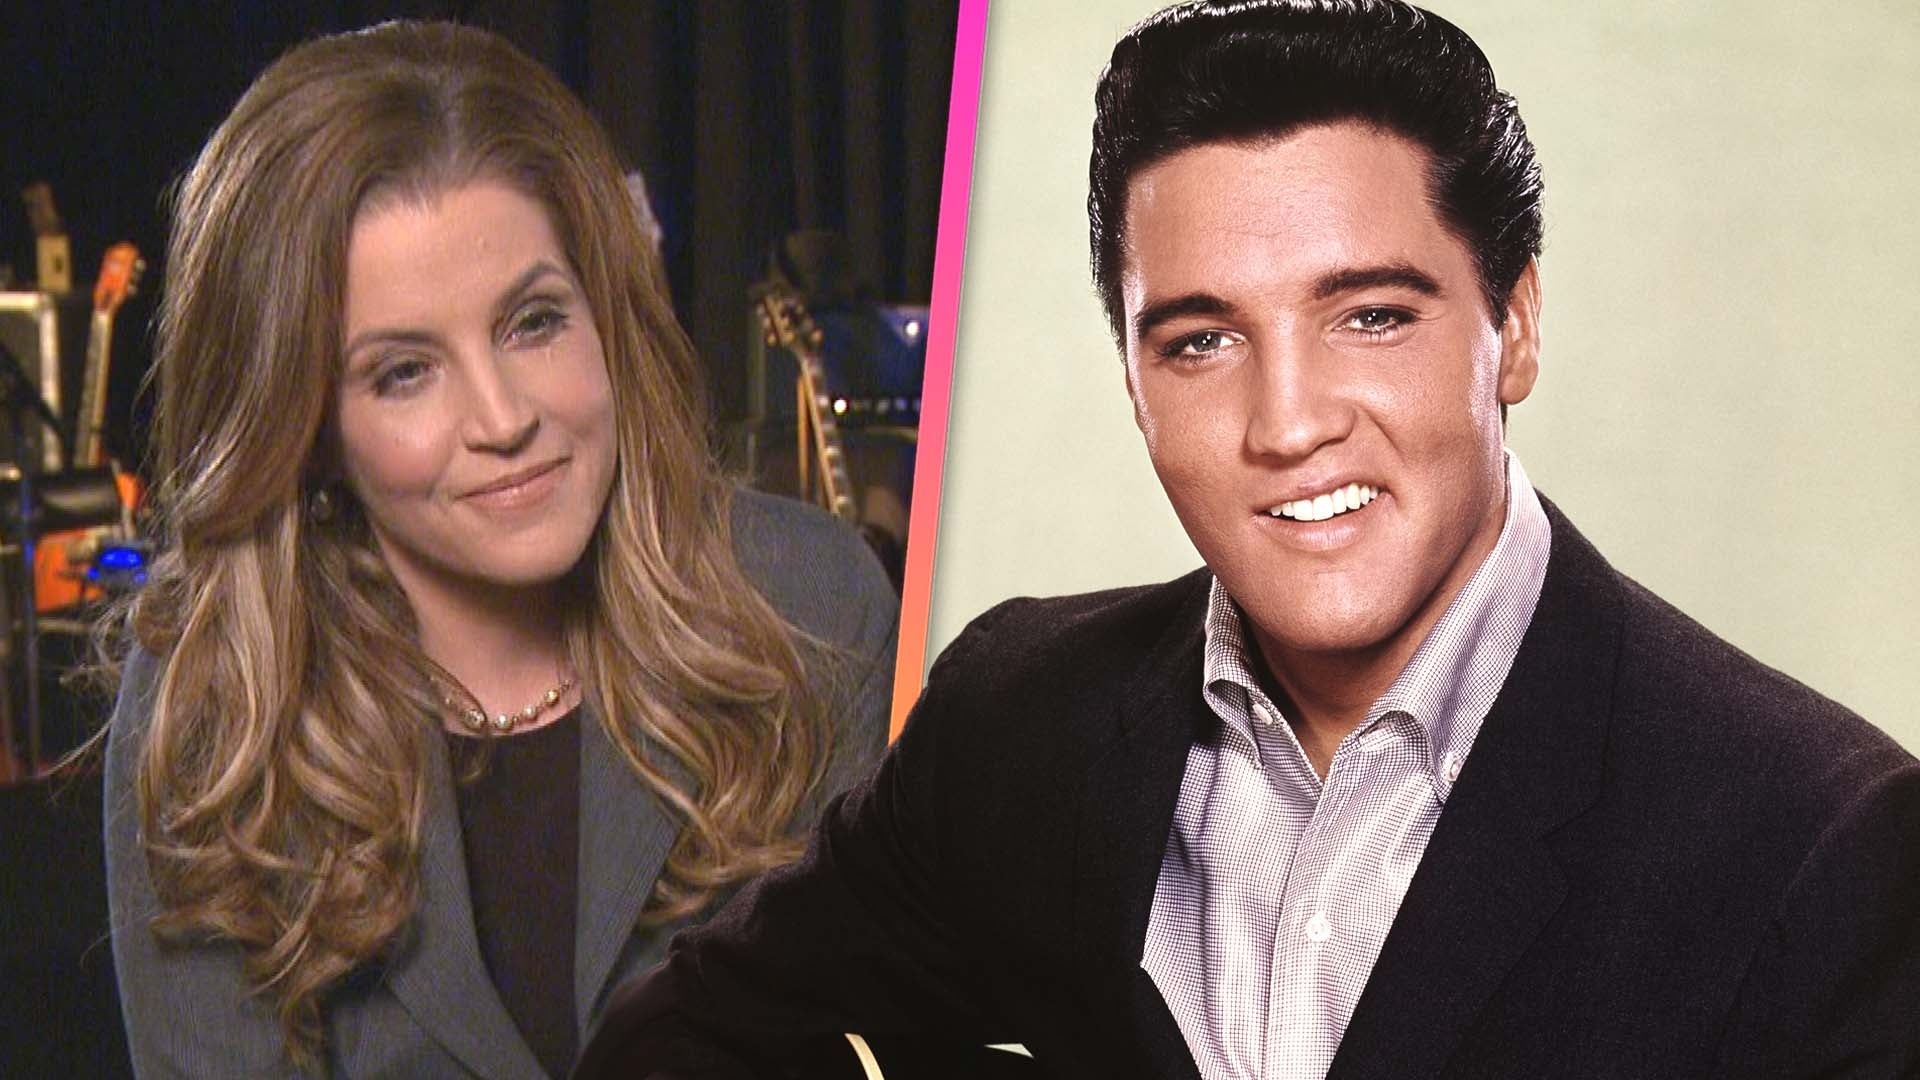 Lisa Marie Presley on Elvis and Following in Dad's Footsteps With Music Career (Flashback)